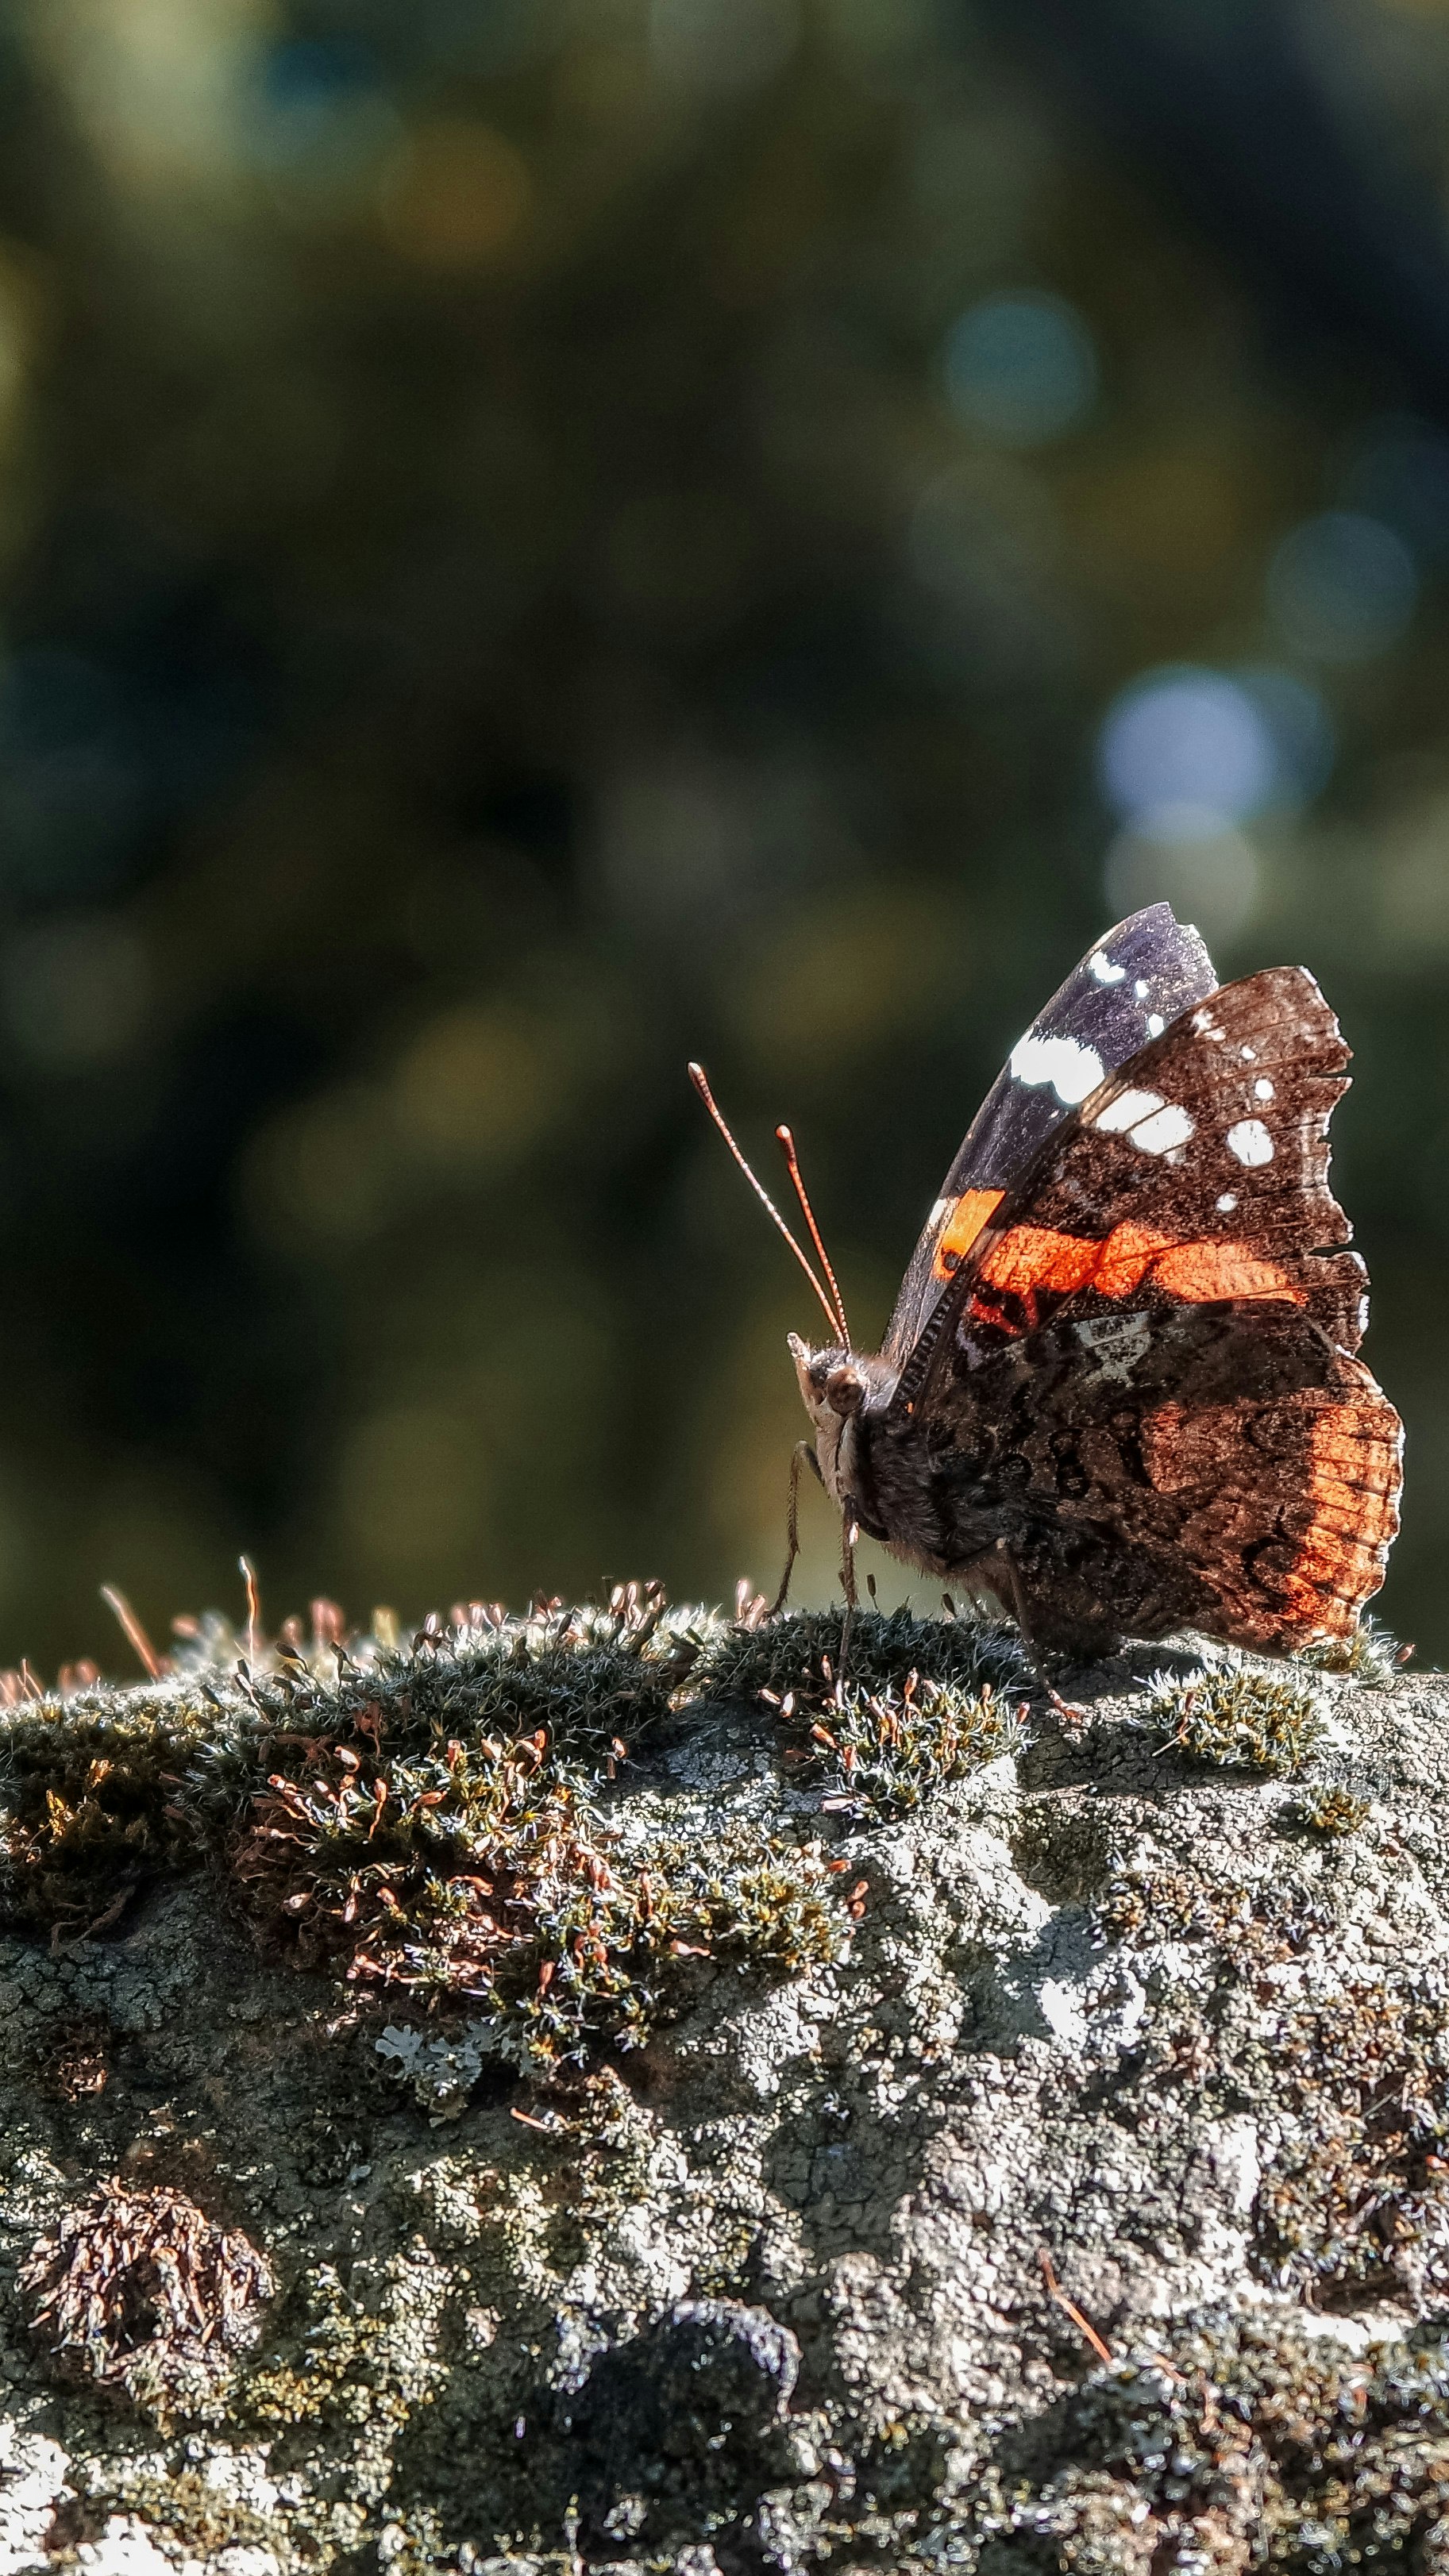 A shot of my favorite butterfly, the Vanessa Atalanta also known as the Red Admiral butterfly.